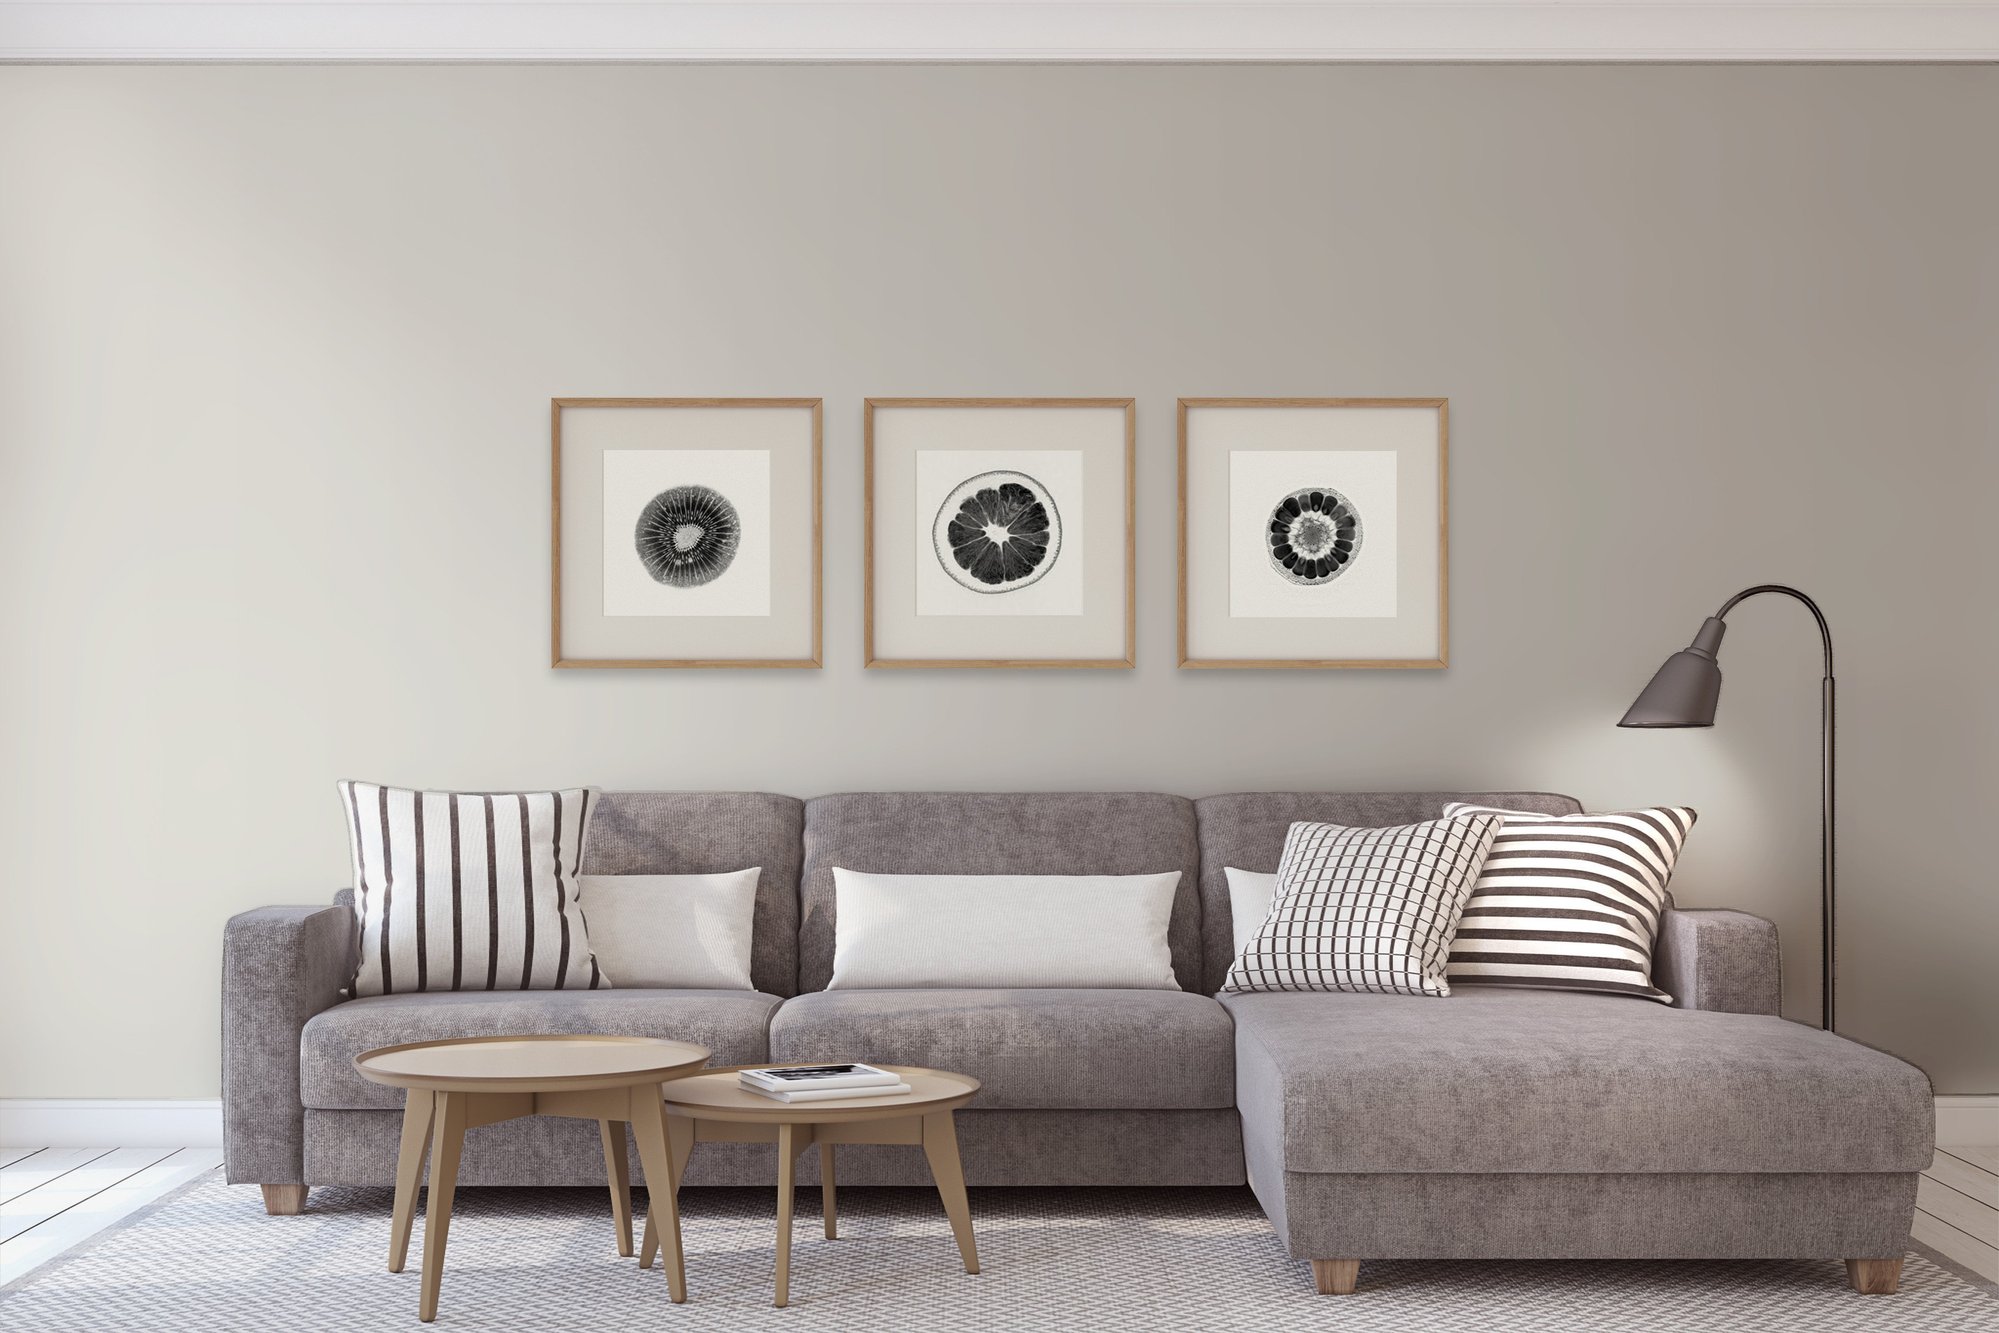 Pewter colored wall with gray couch, wood tables, and art on the wall - what color is pewter